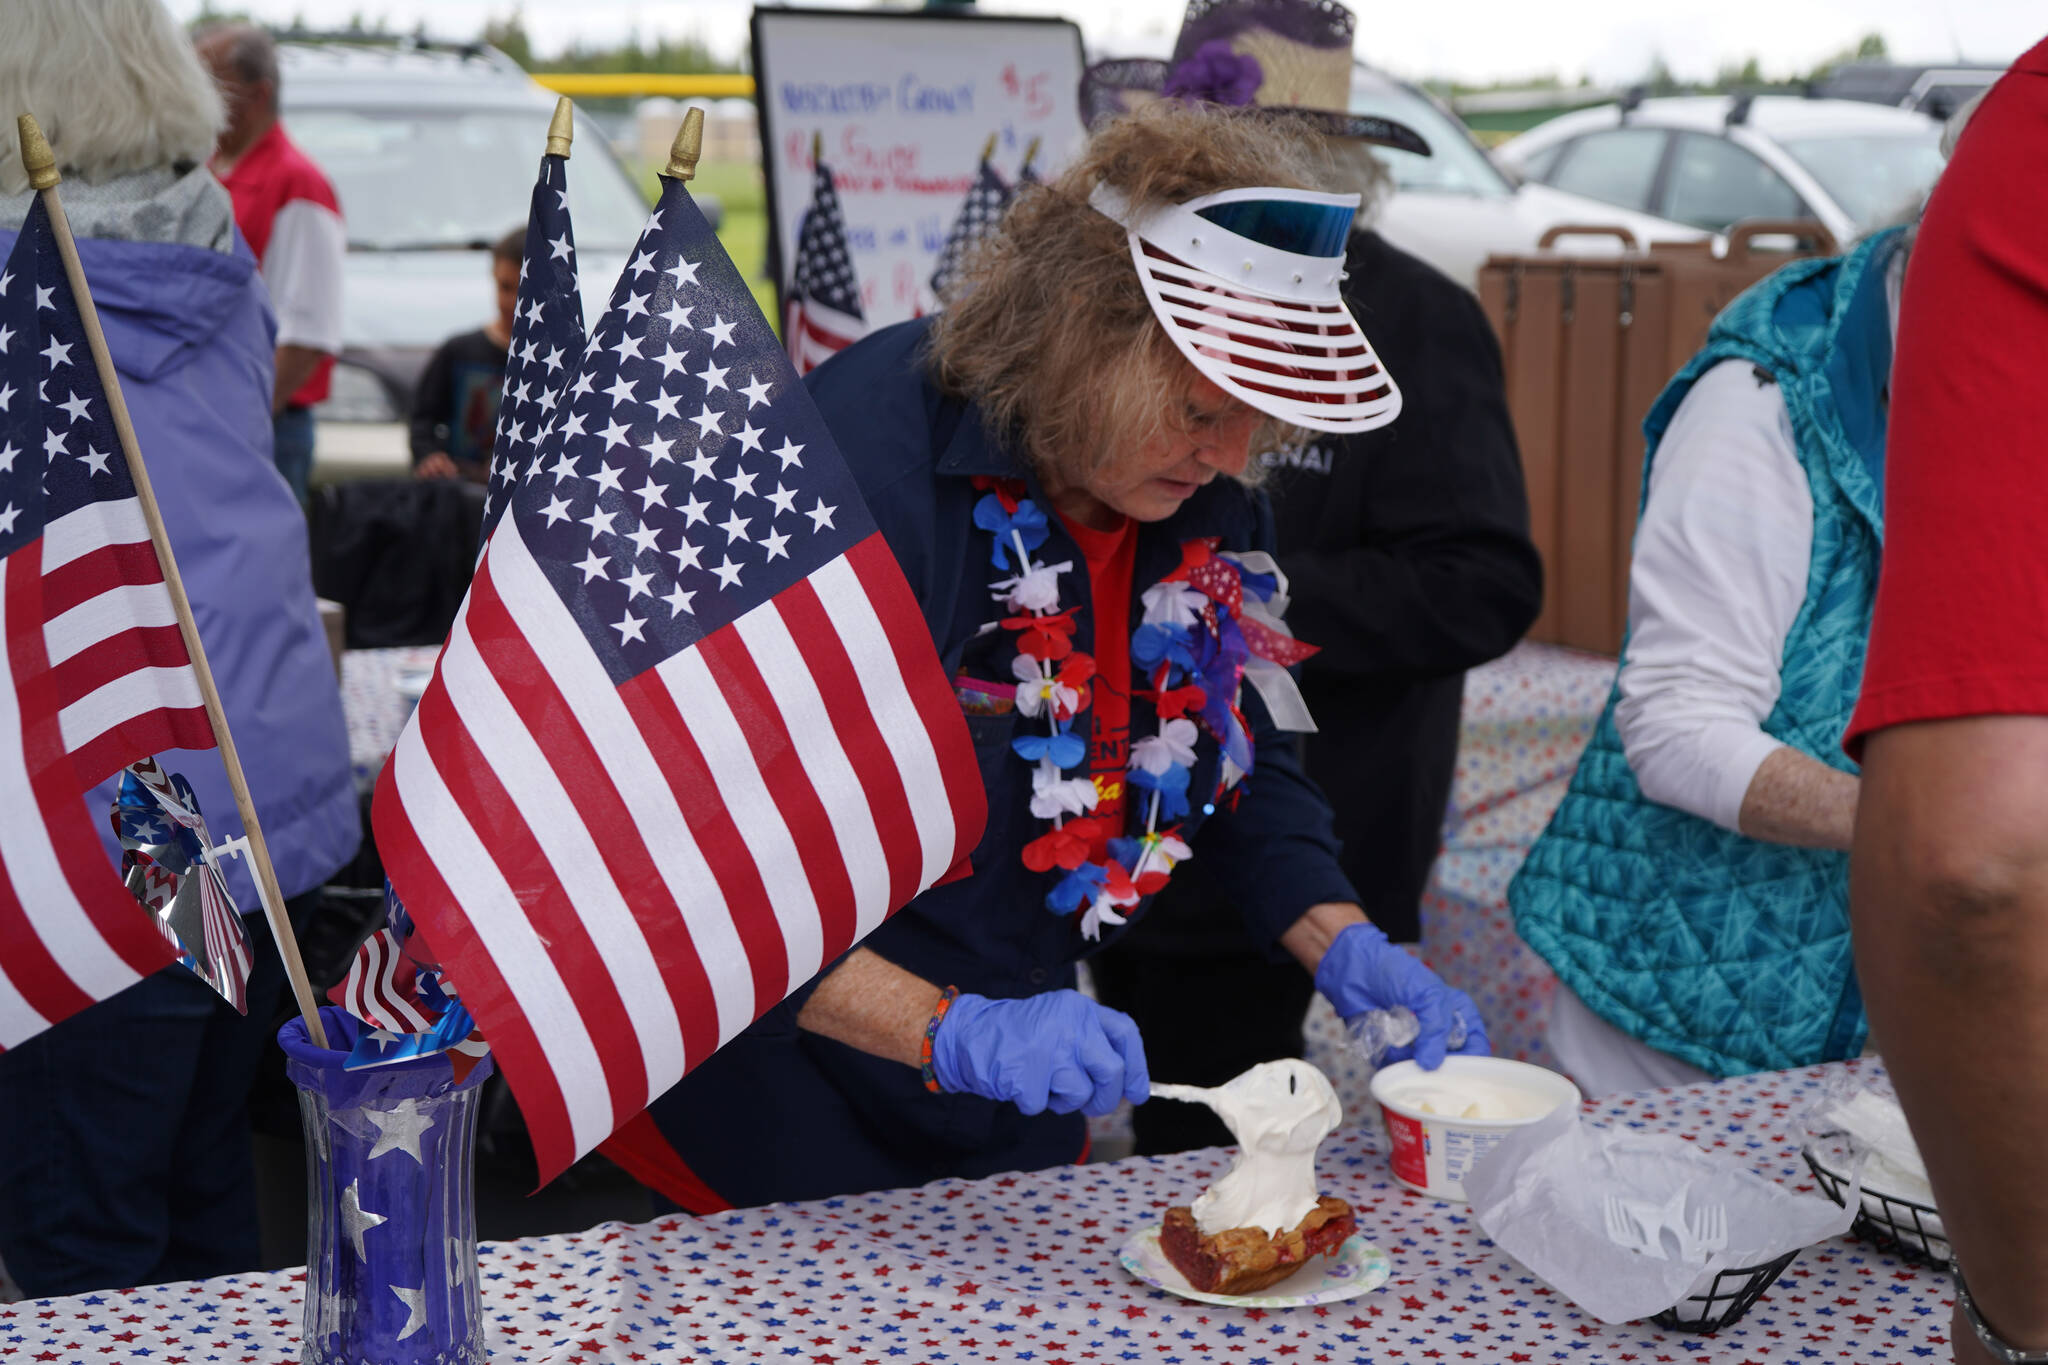 A member of the Kenai Senior Center administers a healthy dollop of cool whip onto a slice of strawberry rhubarb pie during Fourth of July festivities at the softball greenstrip in Kenai, Alaska on Tuesday, July 4, 2023. (Jake Dye/Peninsula Clarion)